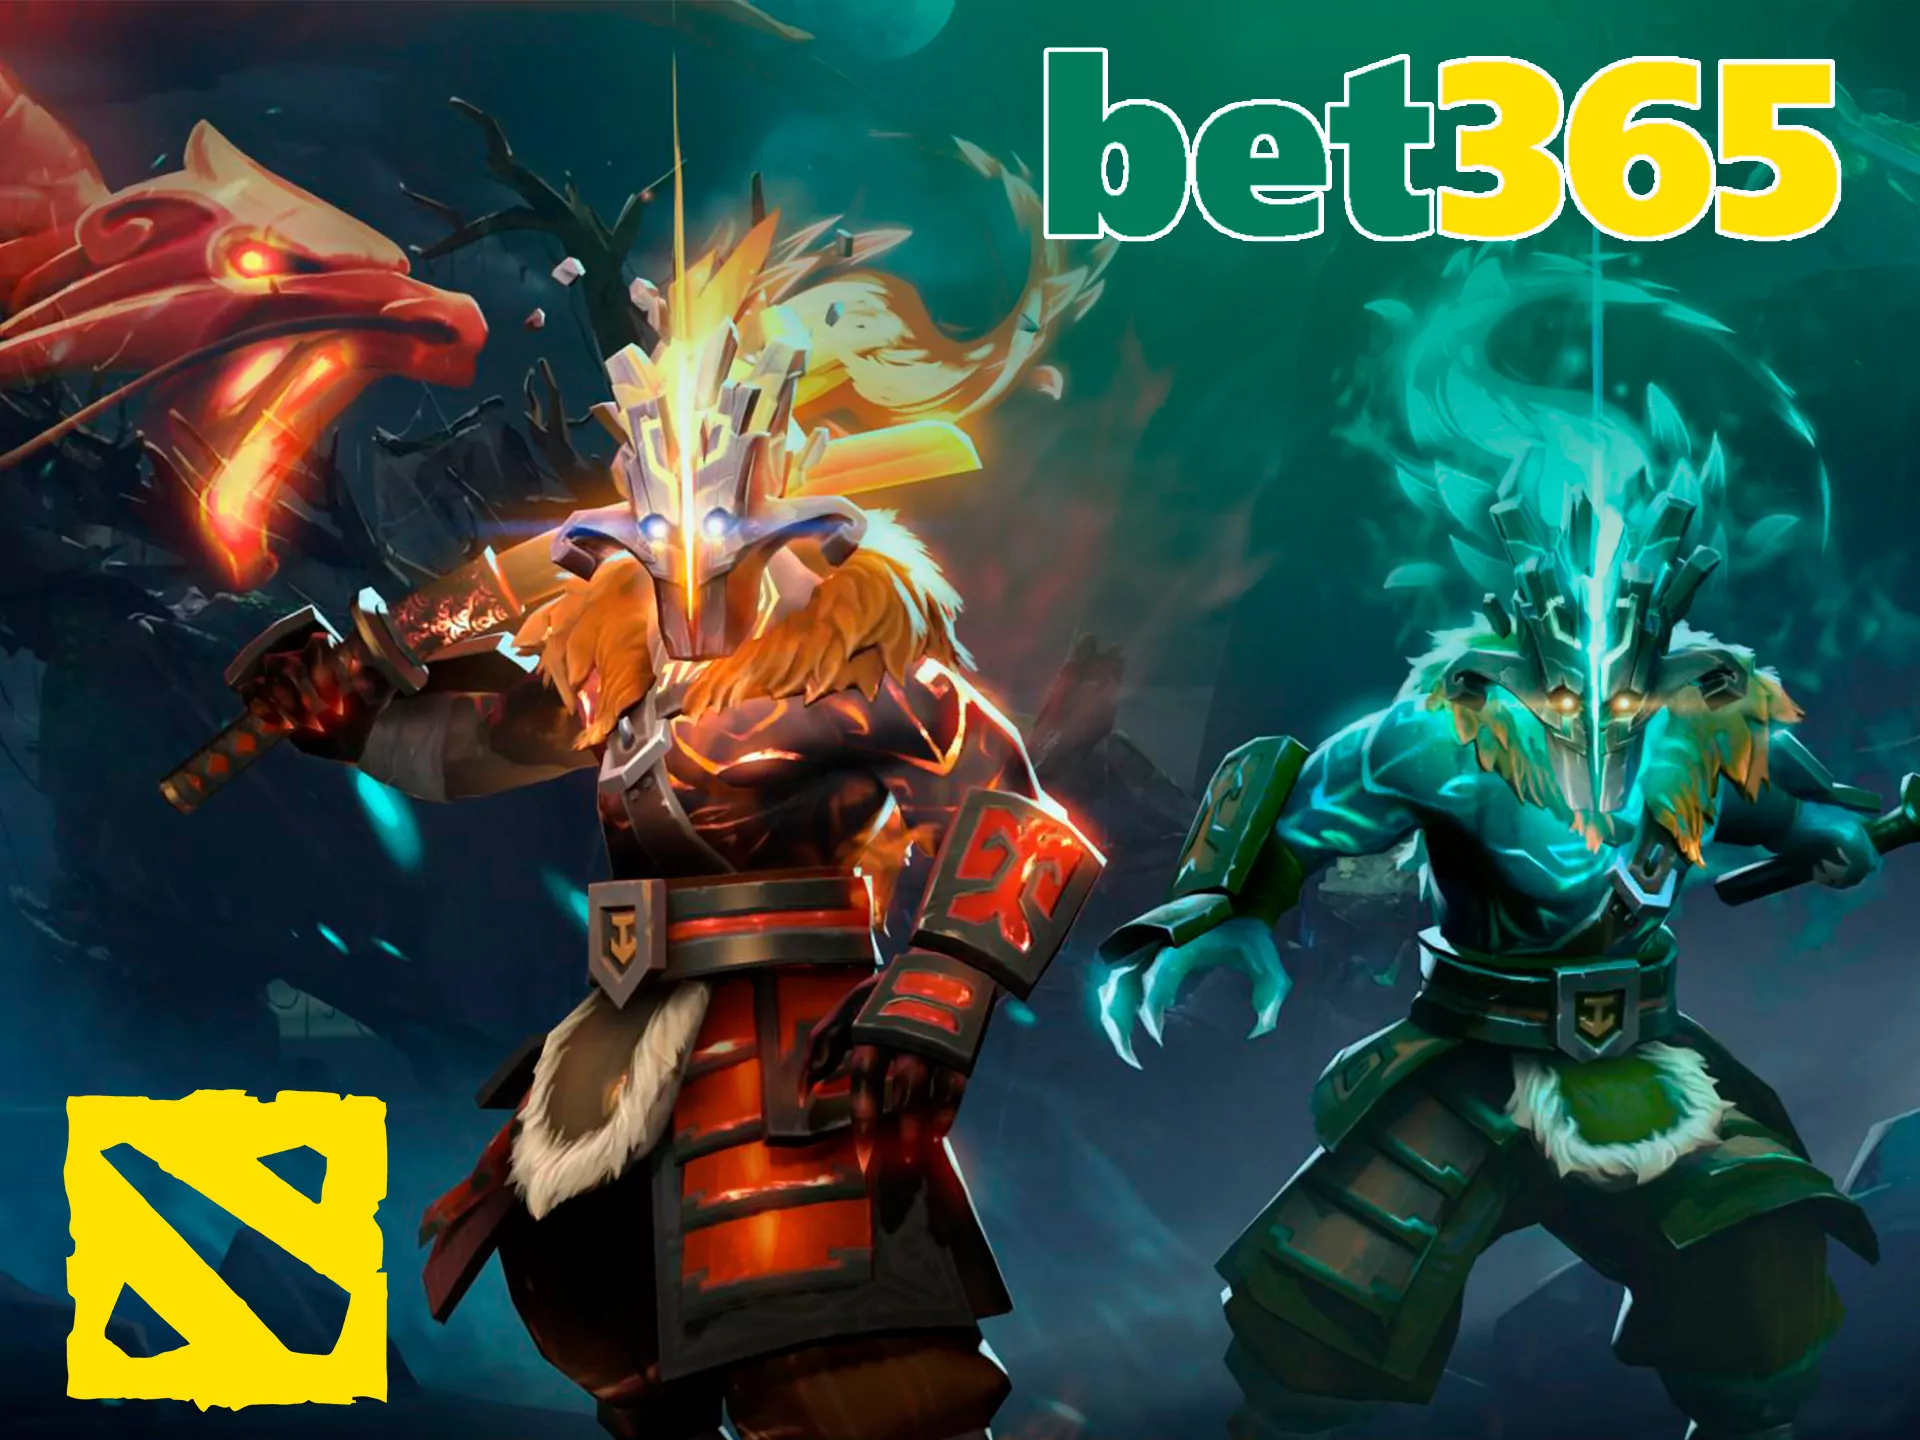 Leading game in the industry, most often bet on at Bet365 BD, amazing odds up to 12.0 on a variety of betting types.